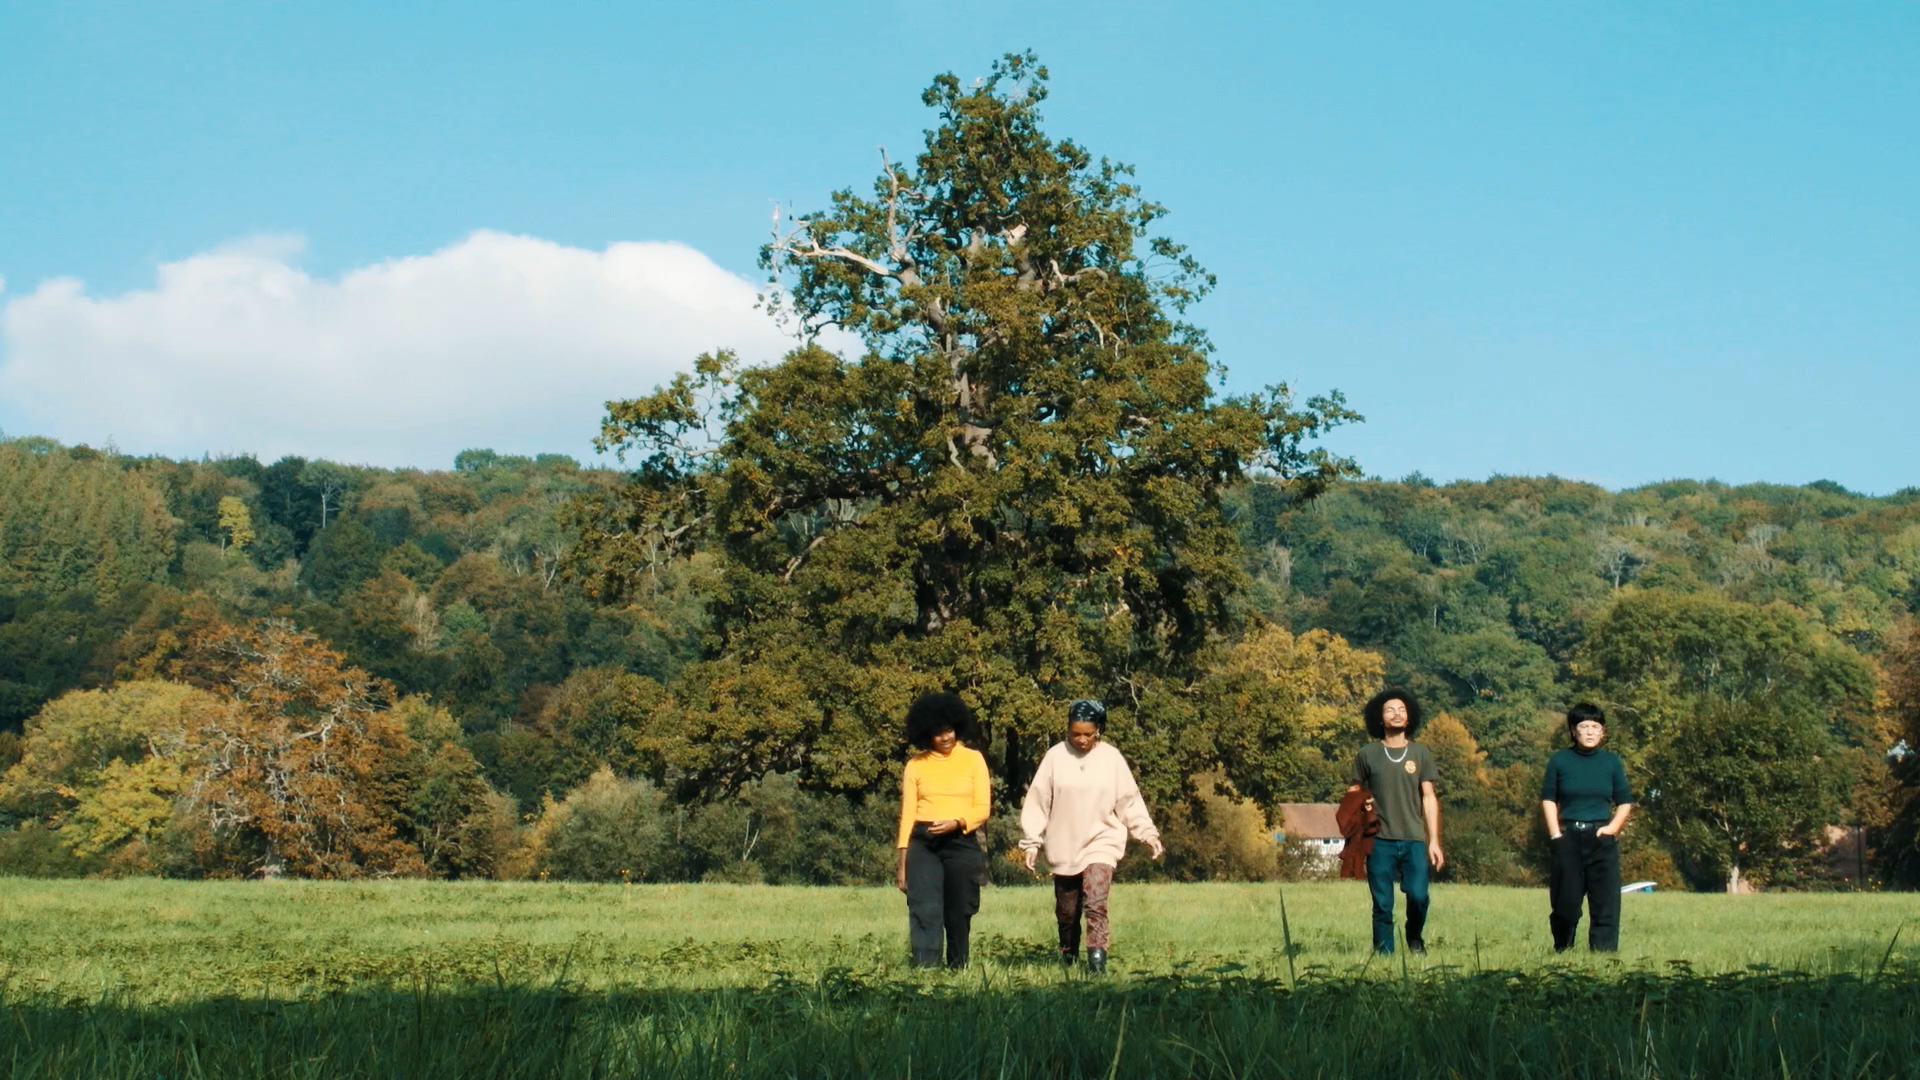 Four people walking in a grass field, with a large tree and woodland in the background